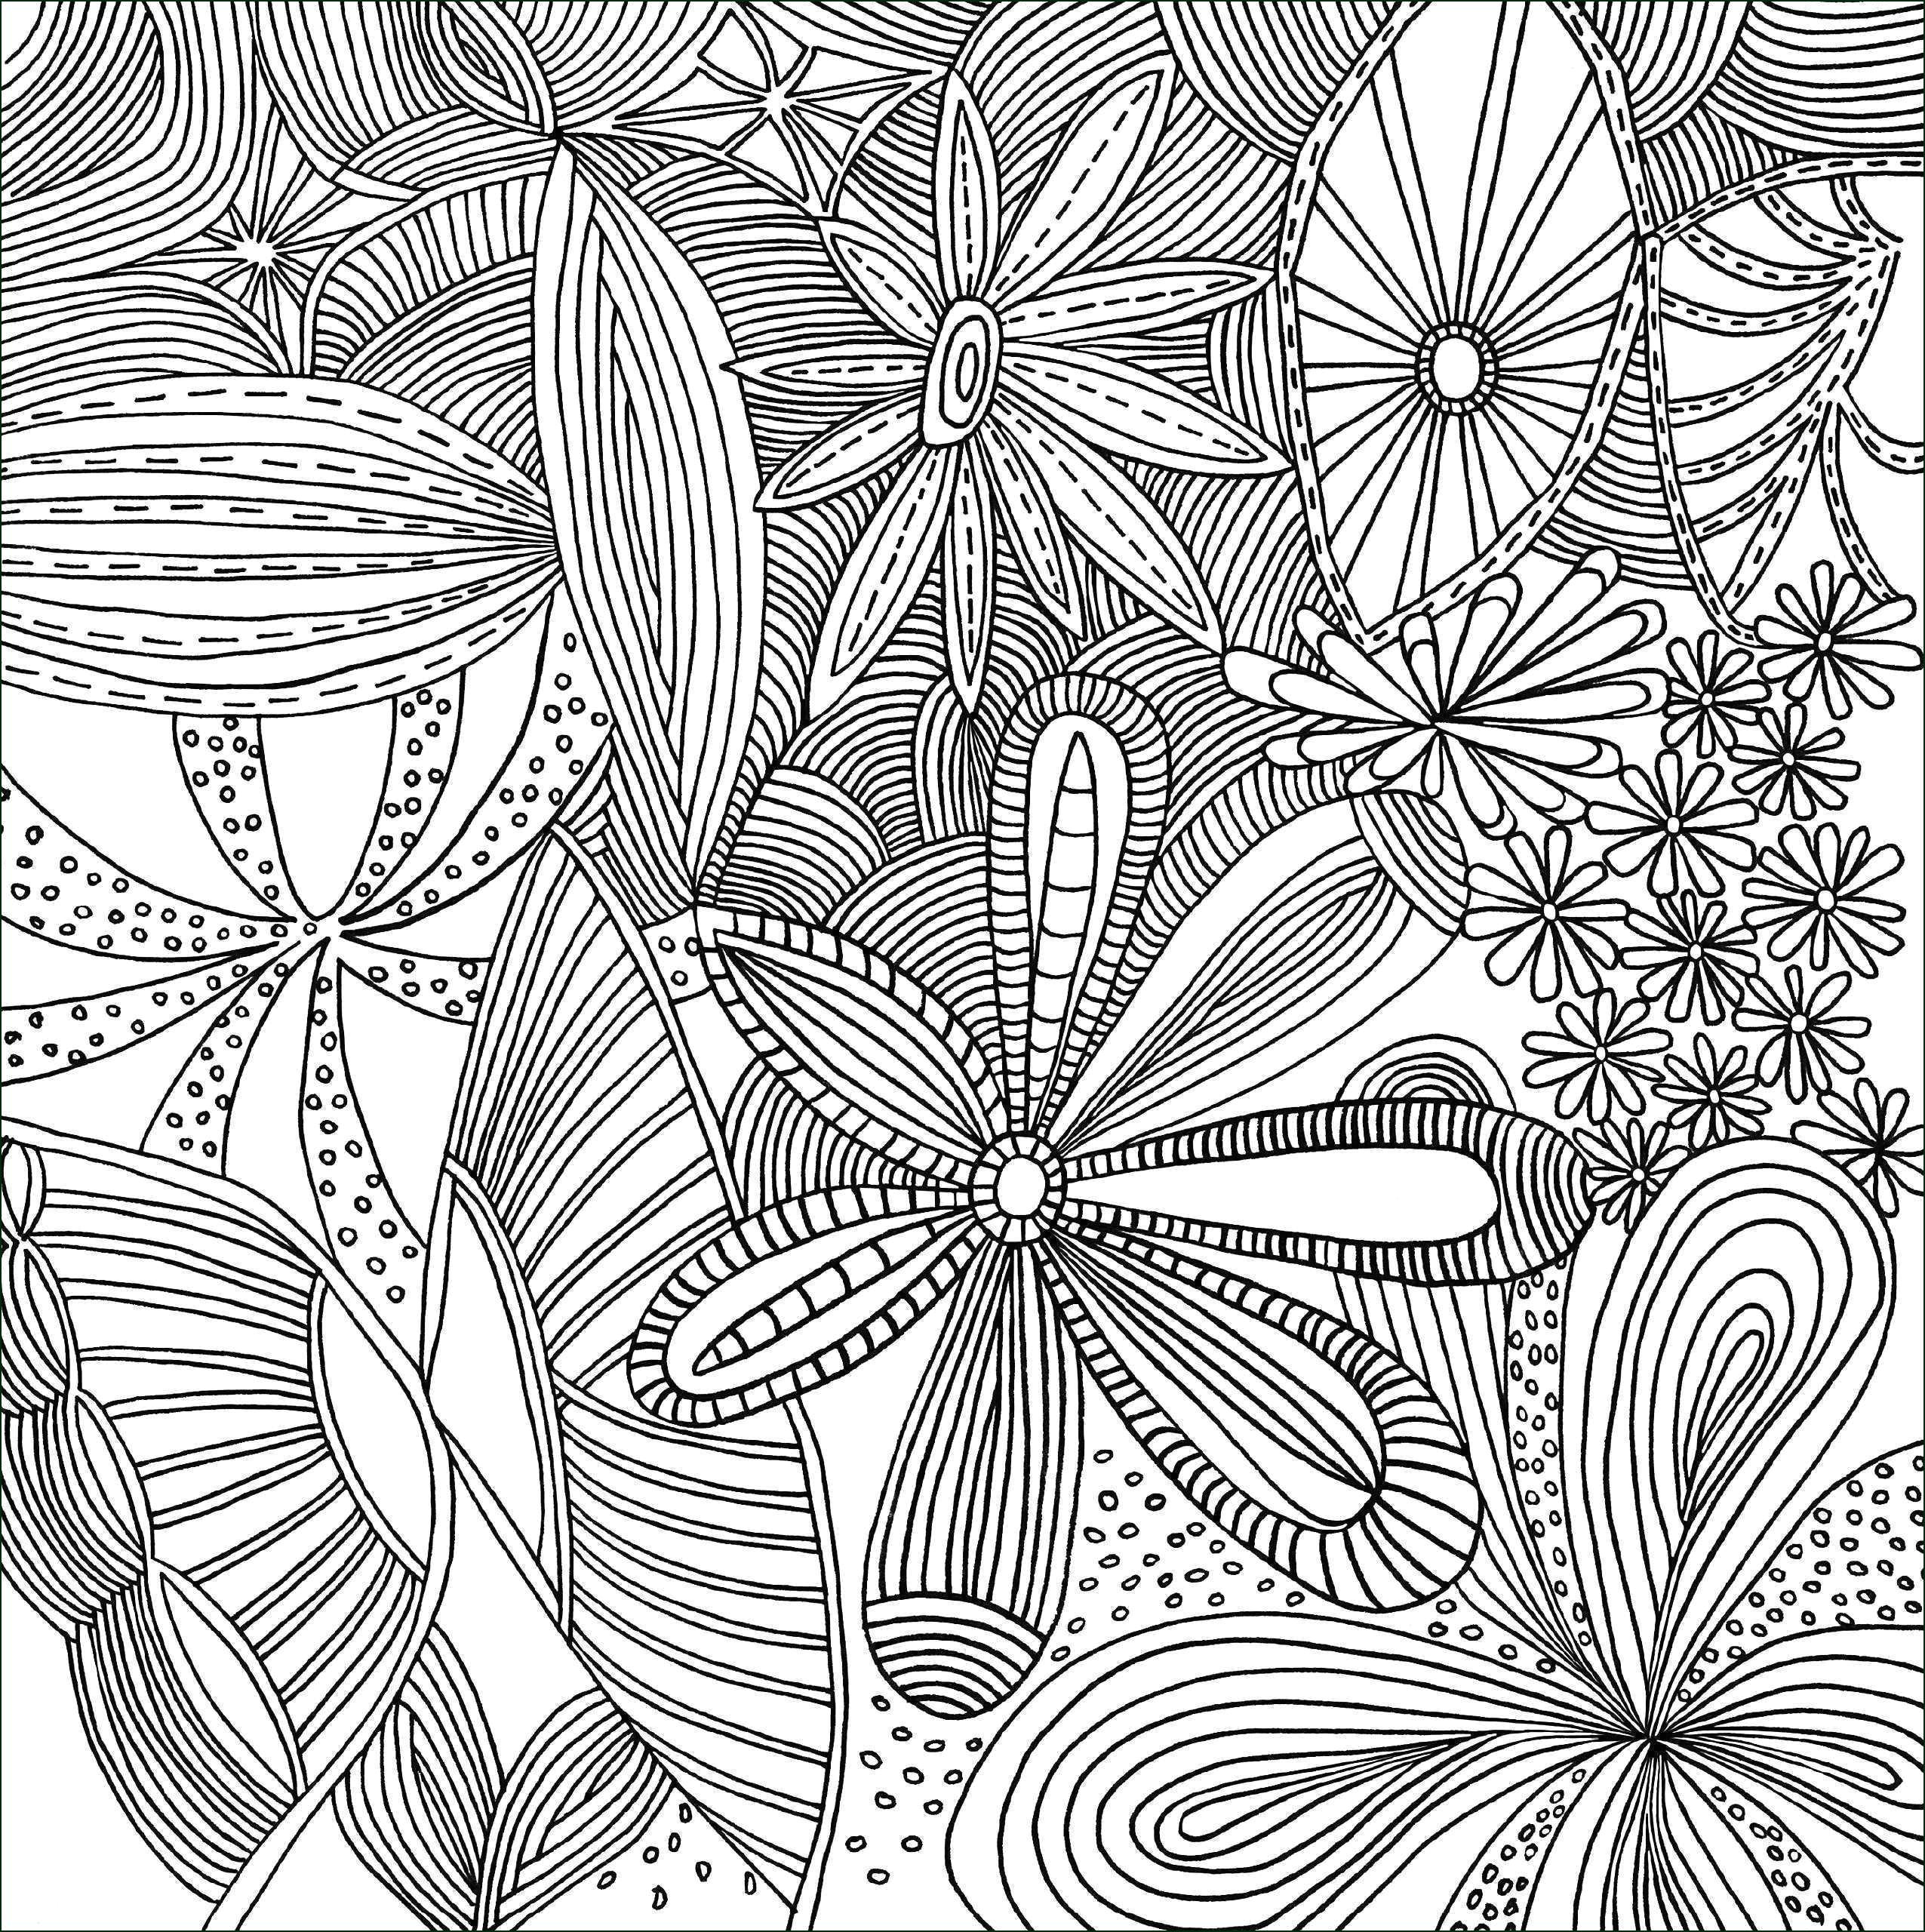 canvas lovely coloring sheet girl unique coloring canvas 0d types of black girl drawing of drawings